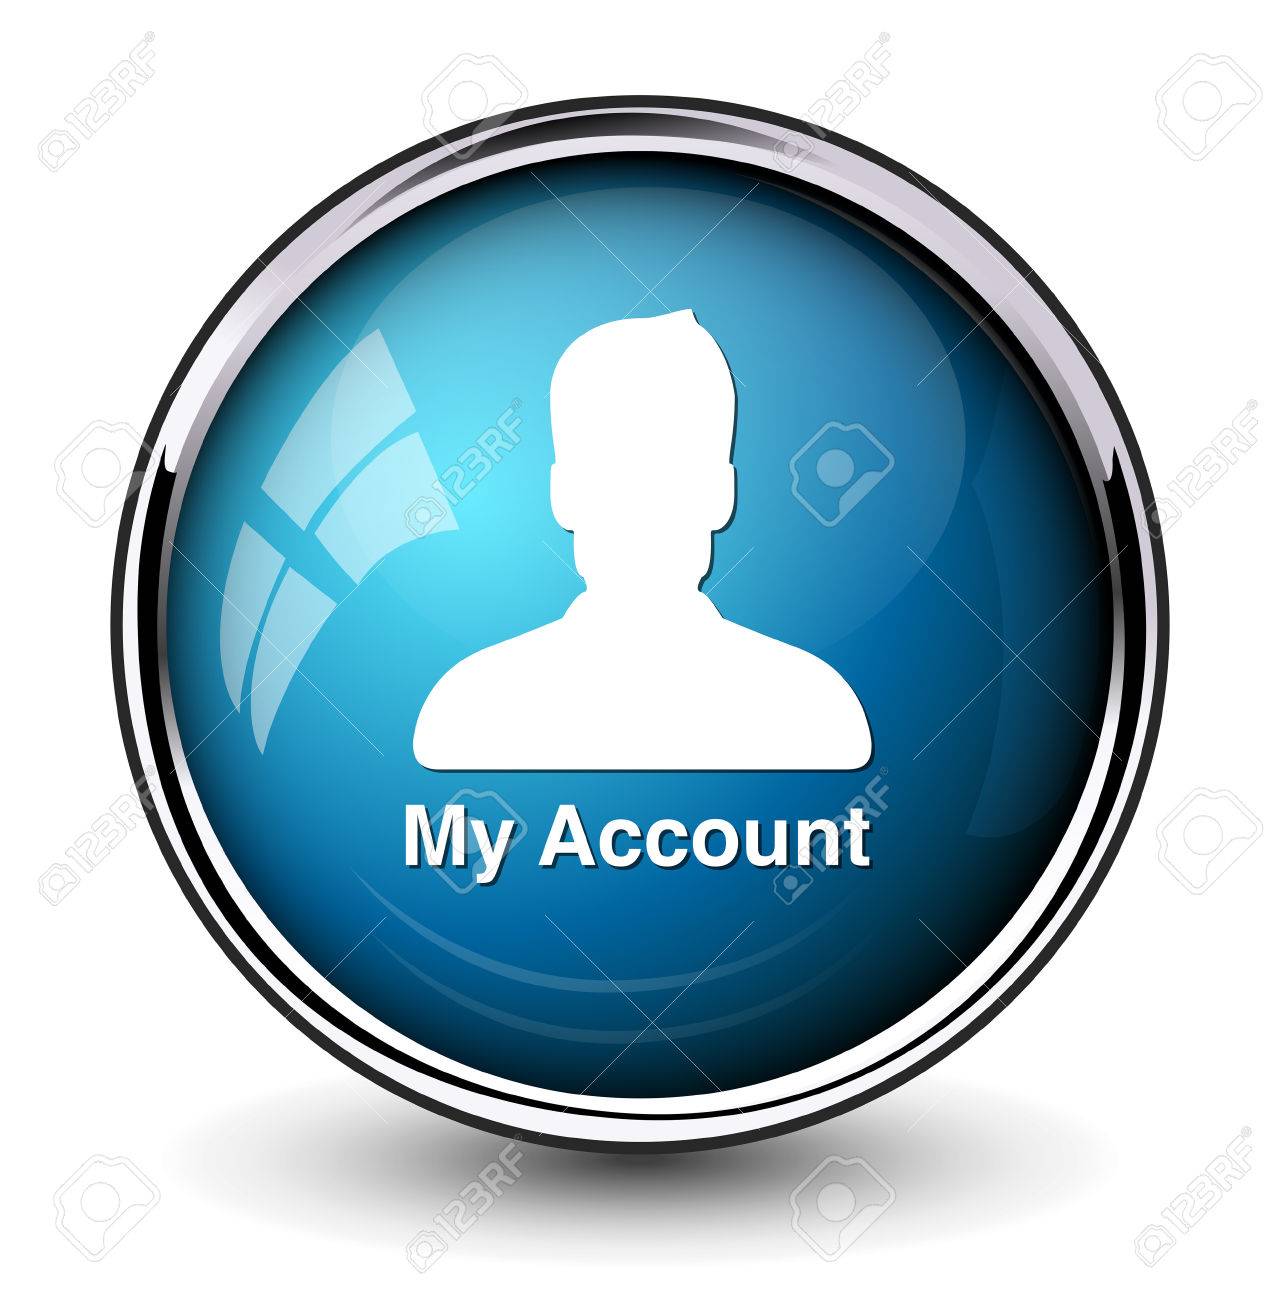 My account icon. internet button on white background. stock 